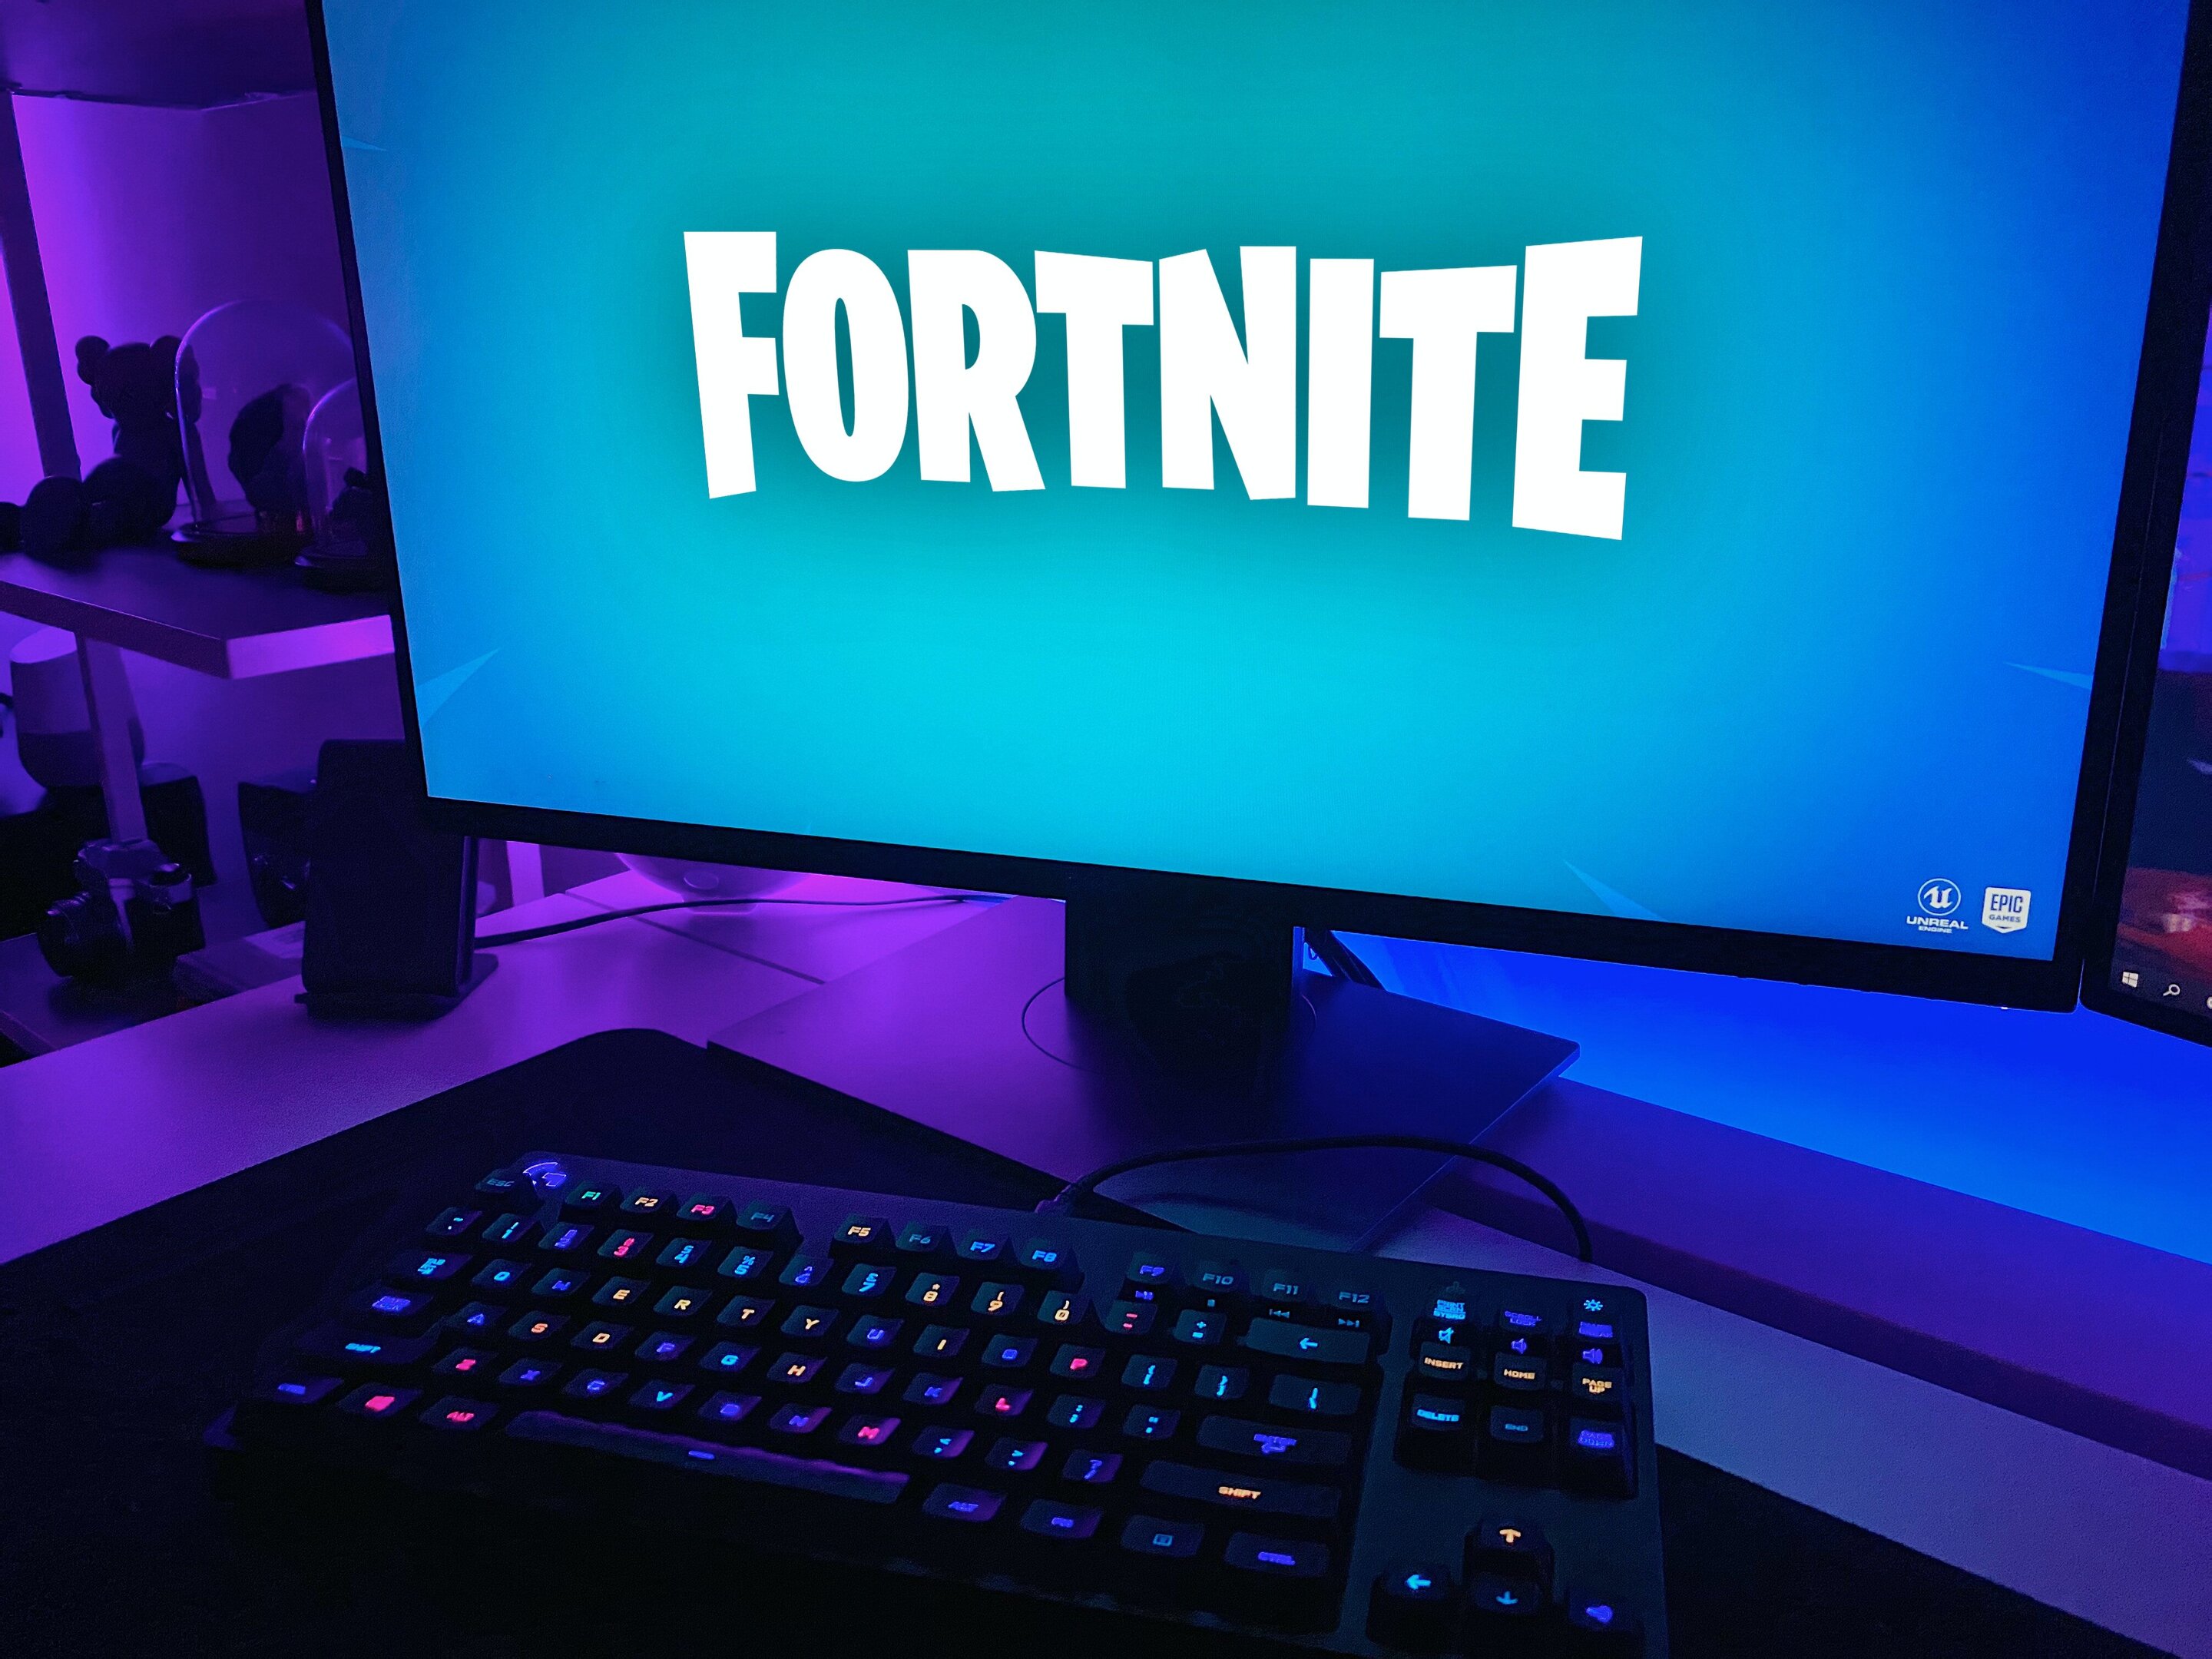 KAWS on why he's exhibiting his new art show in Fortnite